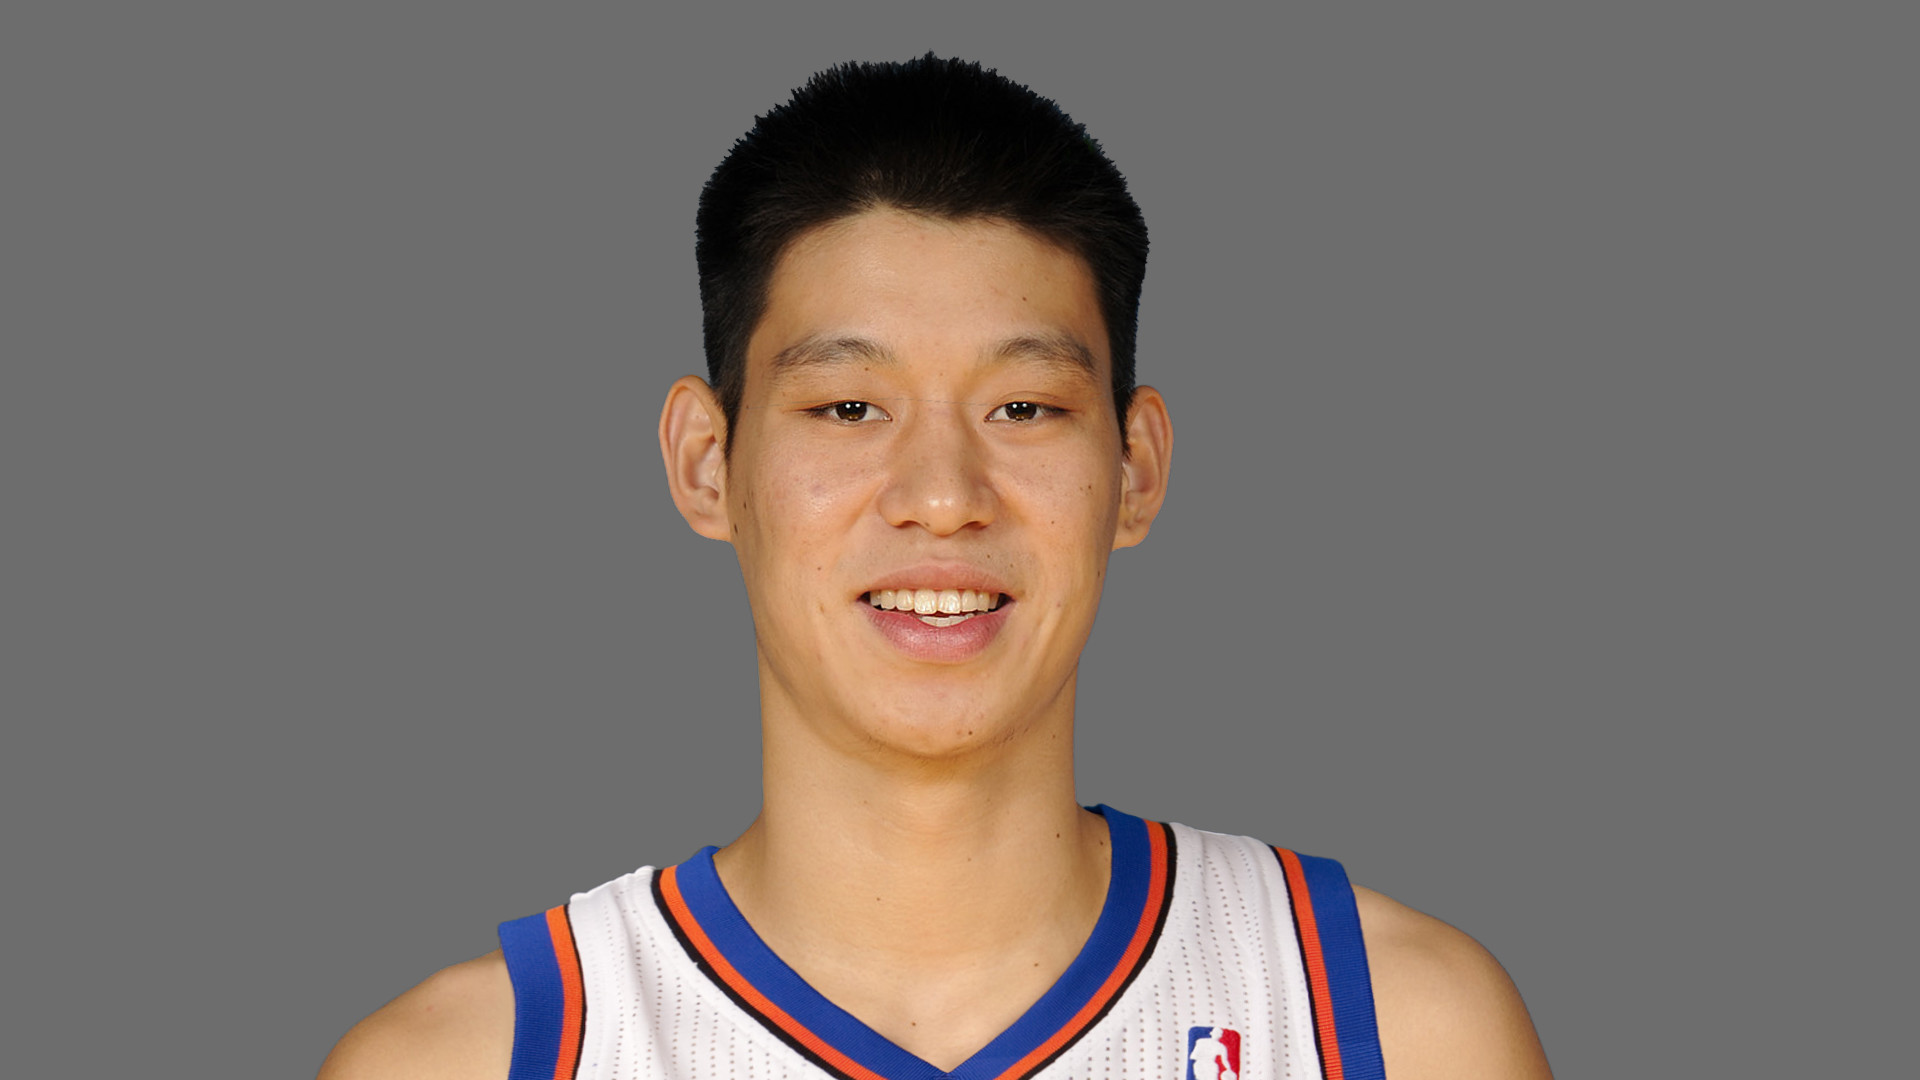 1920x1080  Wallpaper jeremy lin, actor, basketball player, los angeles  lakers, nda